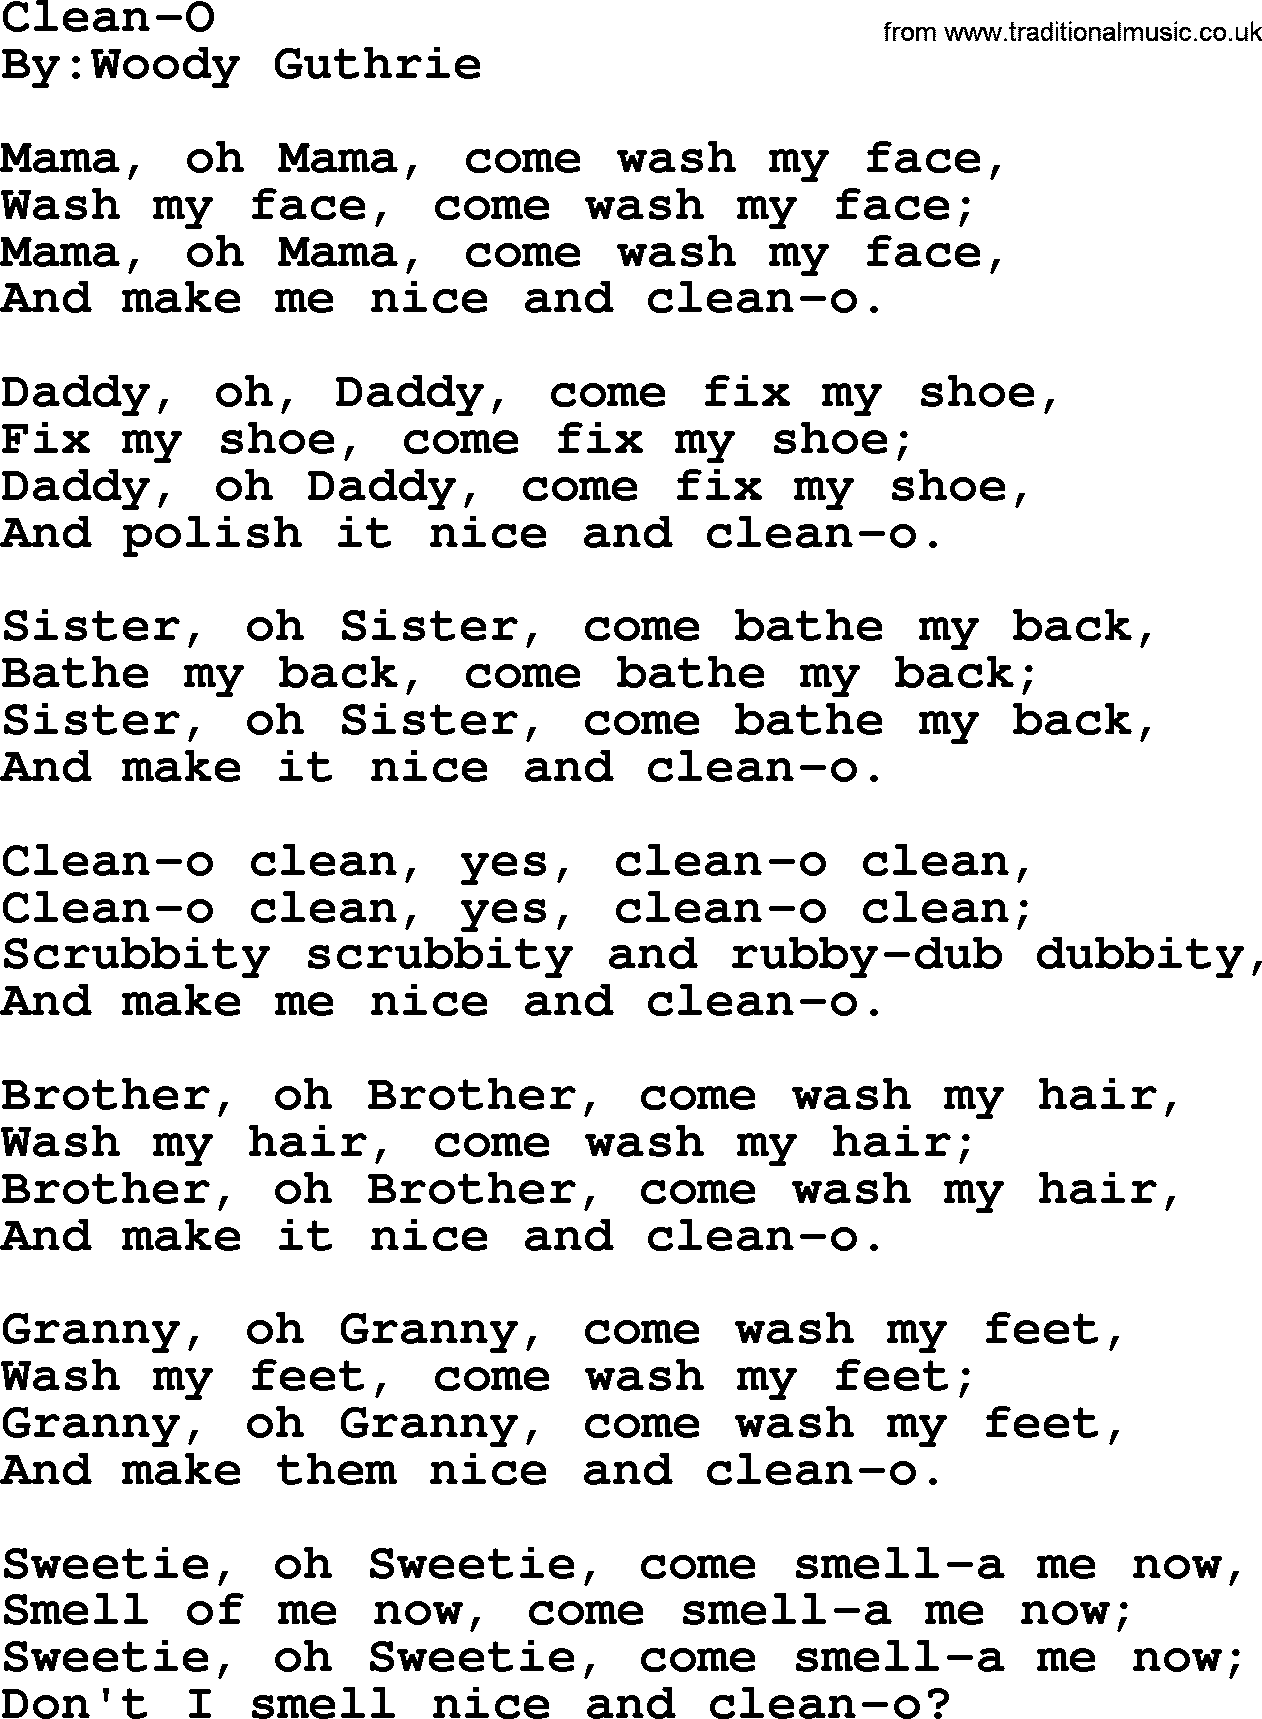 Political, Solidarity, Workers or Union song: Clean-o, lyrics